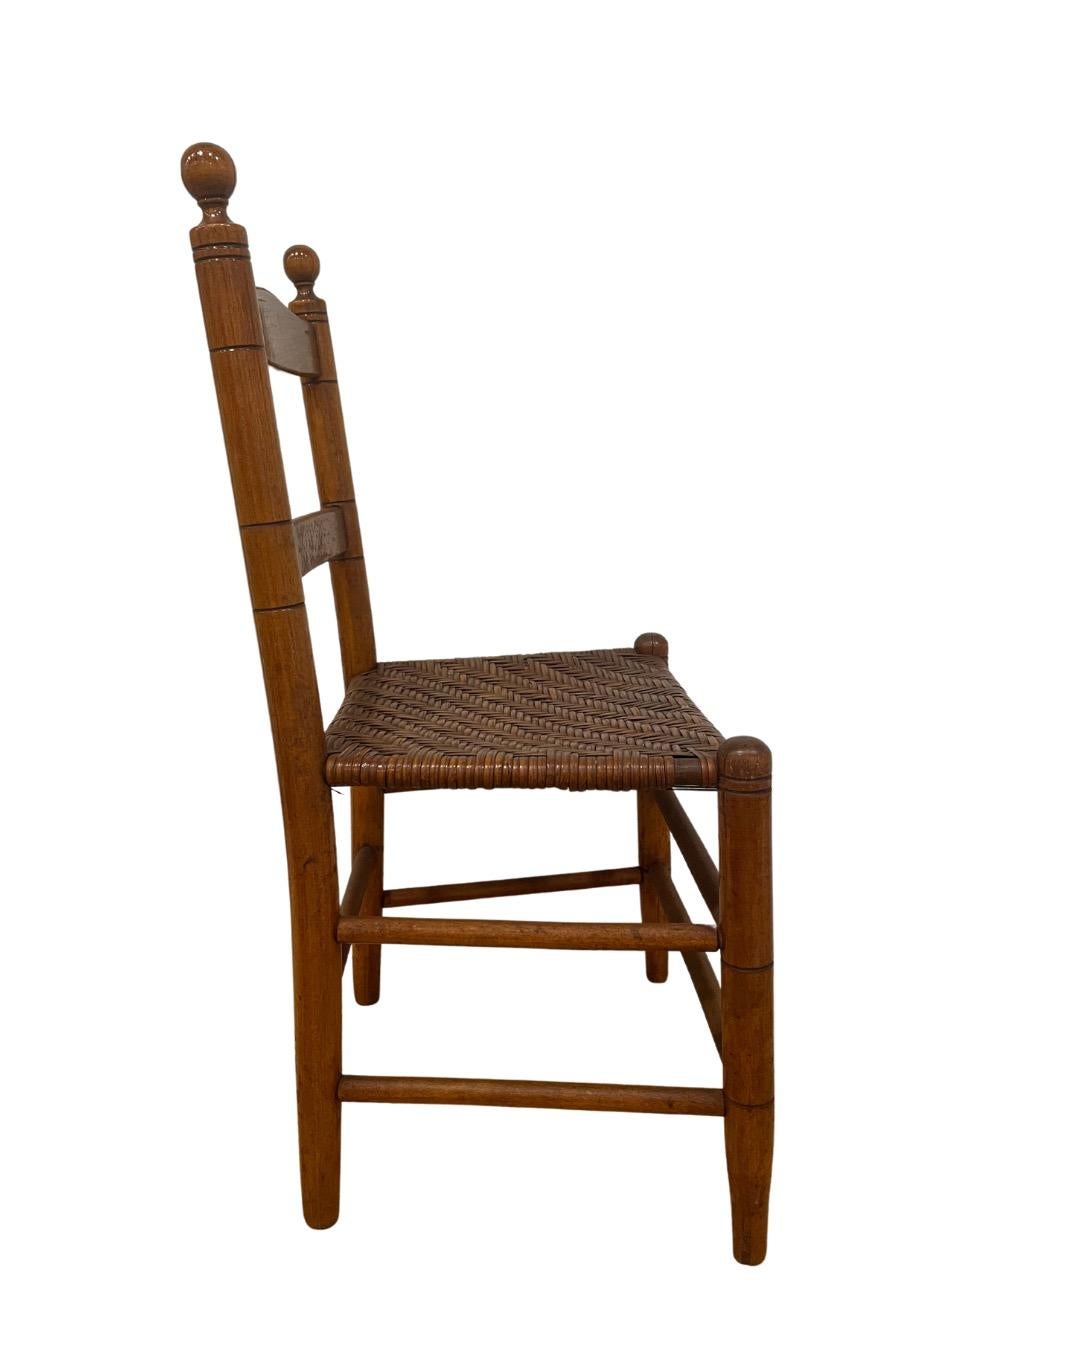 Wooden child's chair attributed to F.A. Sinclair of Mottville, NY. Estimated to be 19th century. Medium brown finish on chair and seat. 

Features include a ladder-back design, ball finials, and tapered legs. Woven splint seat in herringbone